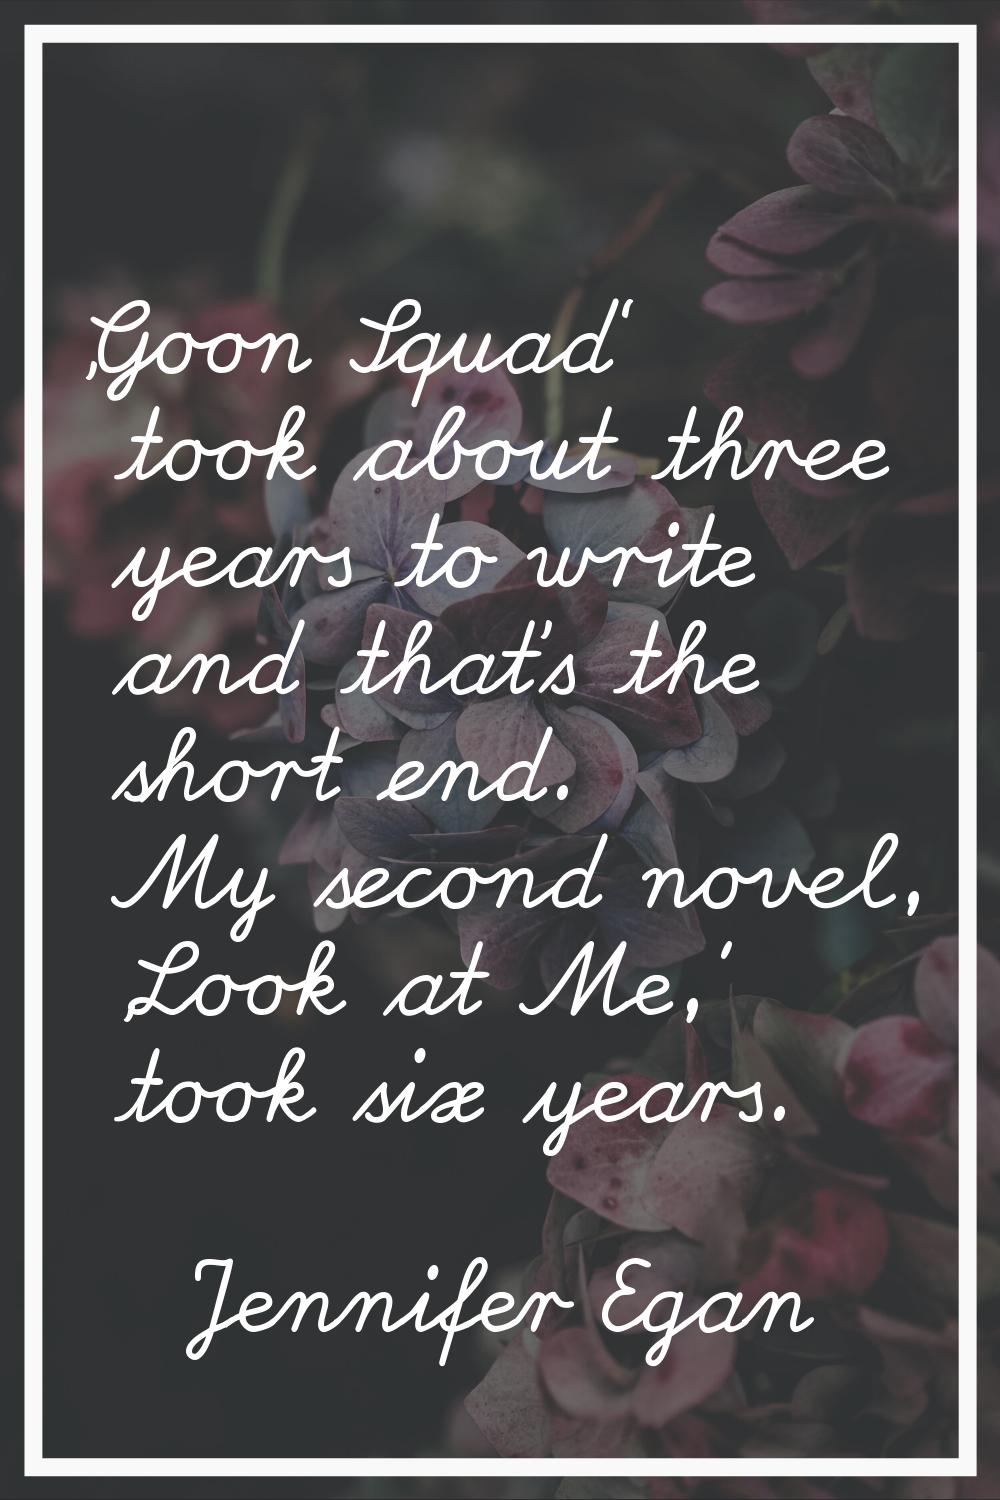 'Goon Squad' took about three years to write and that's the short end. My second novel, 'Look at Me